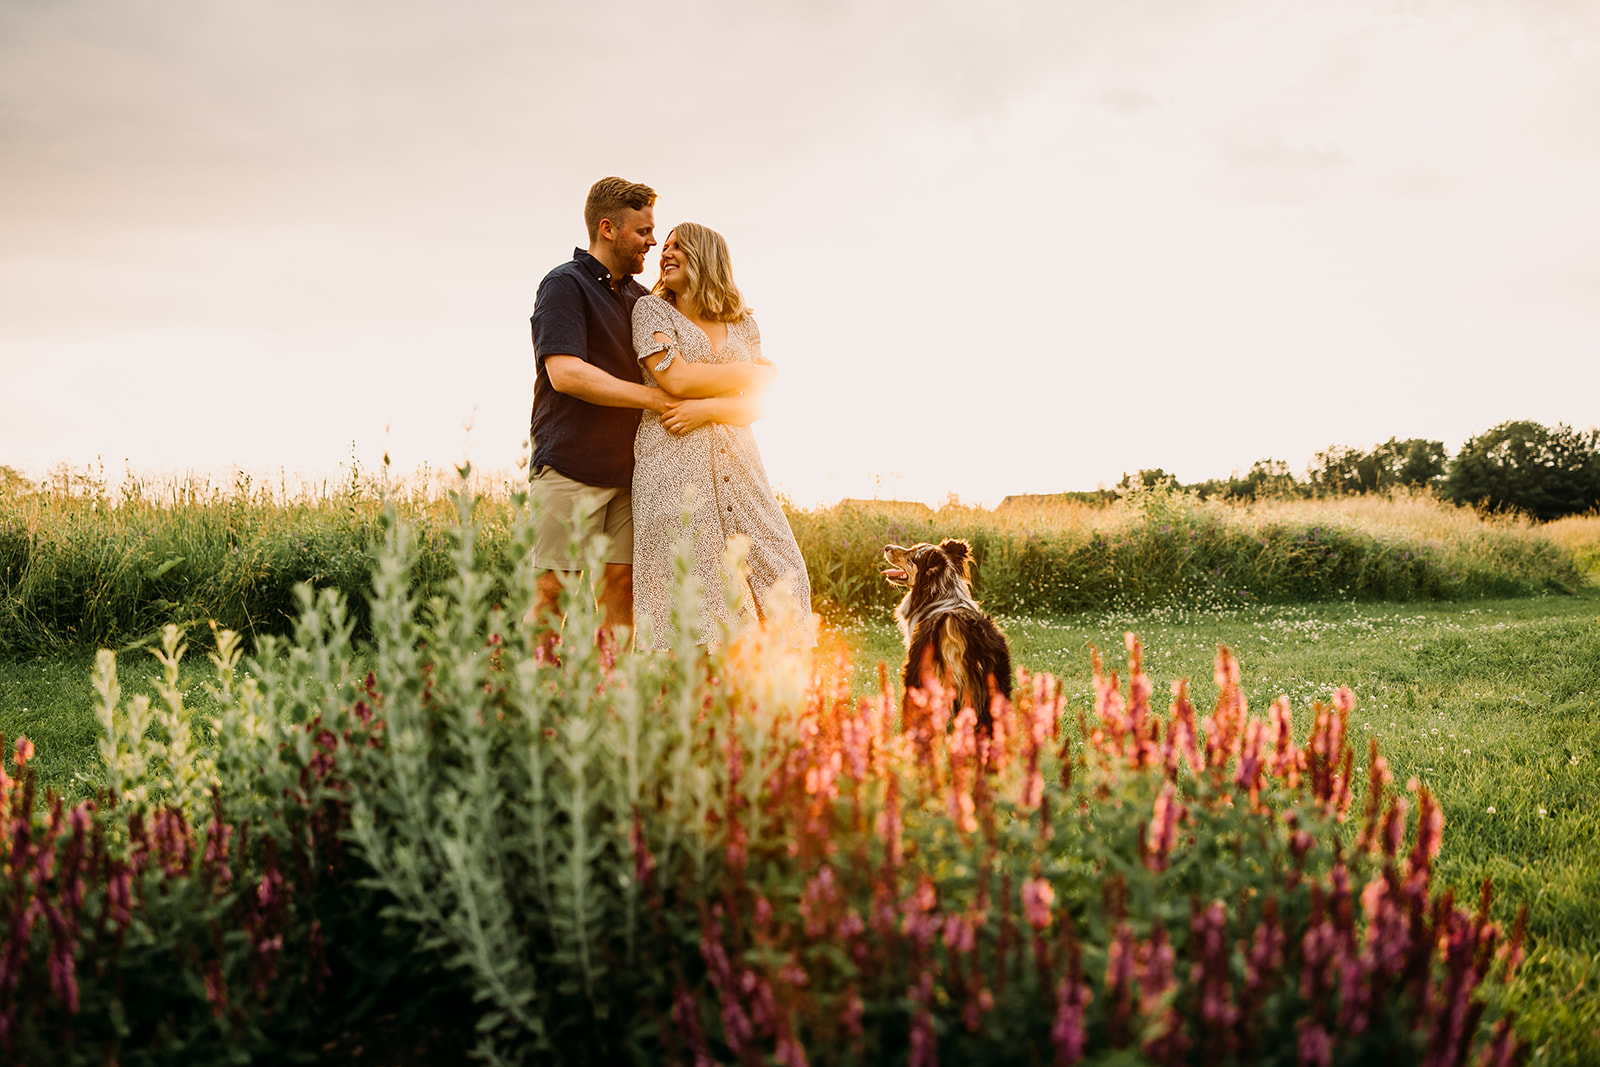 Natural and heartfelt moments captured during the engagement shoot in the field